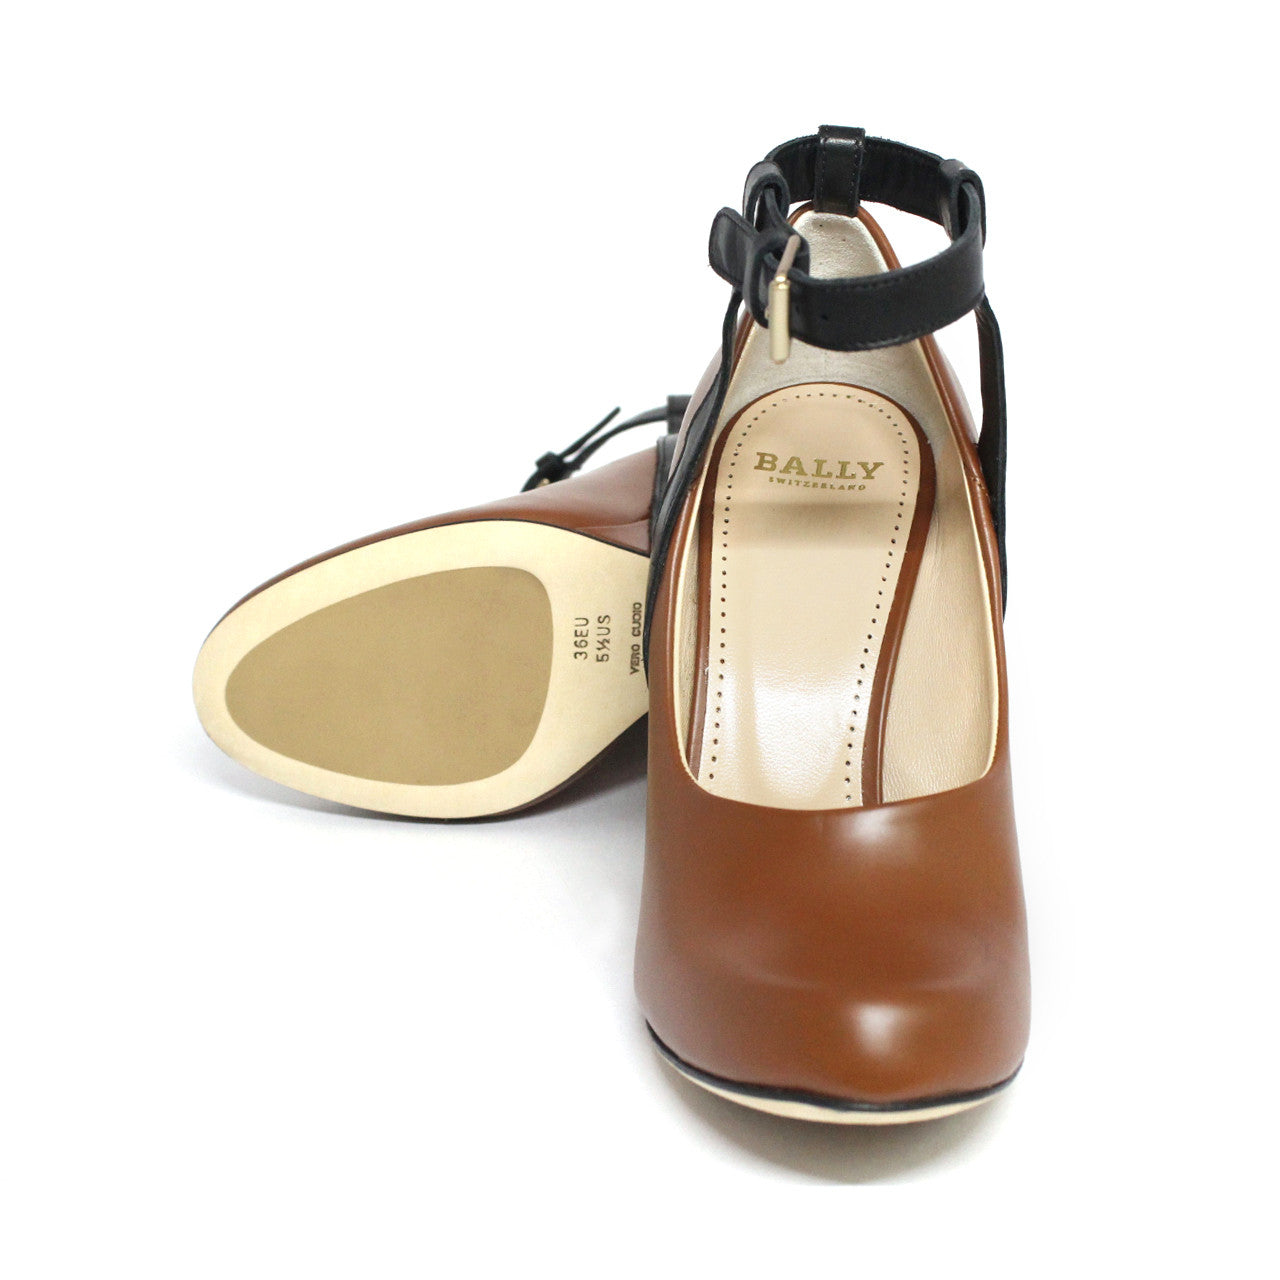 Bally Deodara Women's Wedge Platform Heels With Ankle Whisky Strap